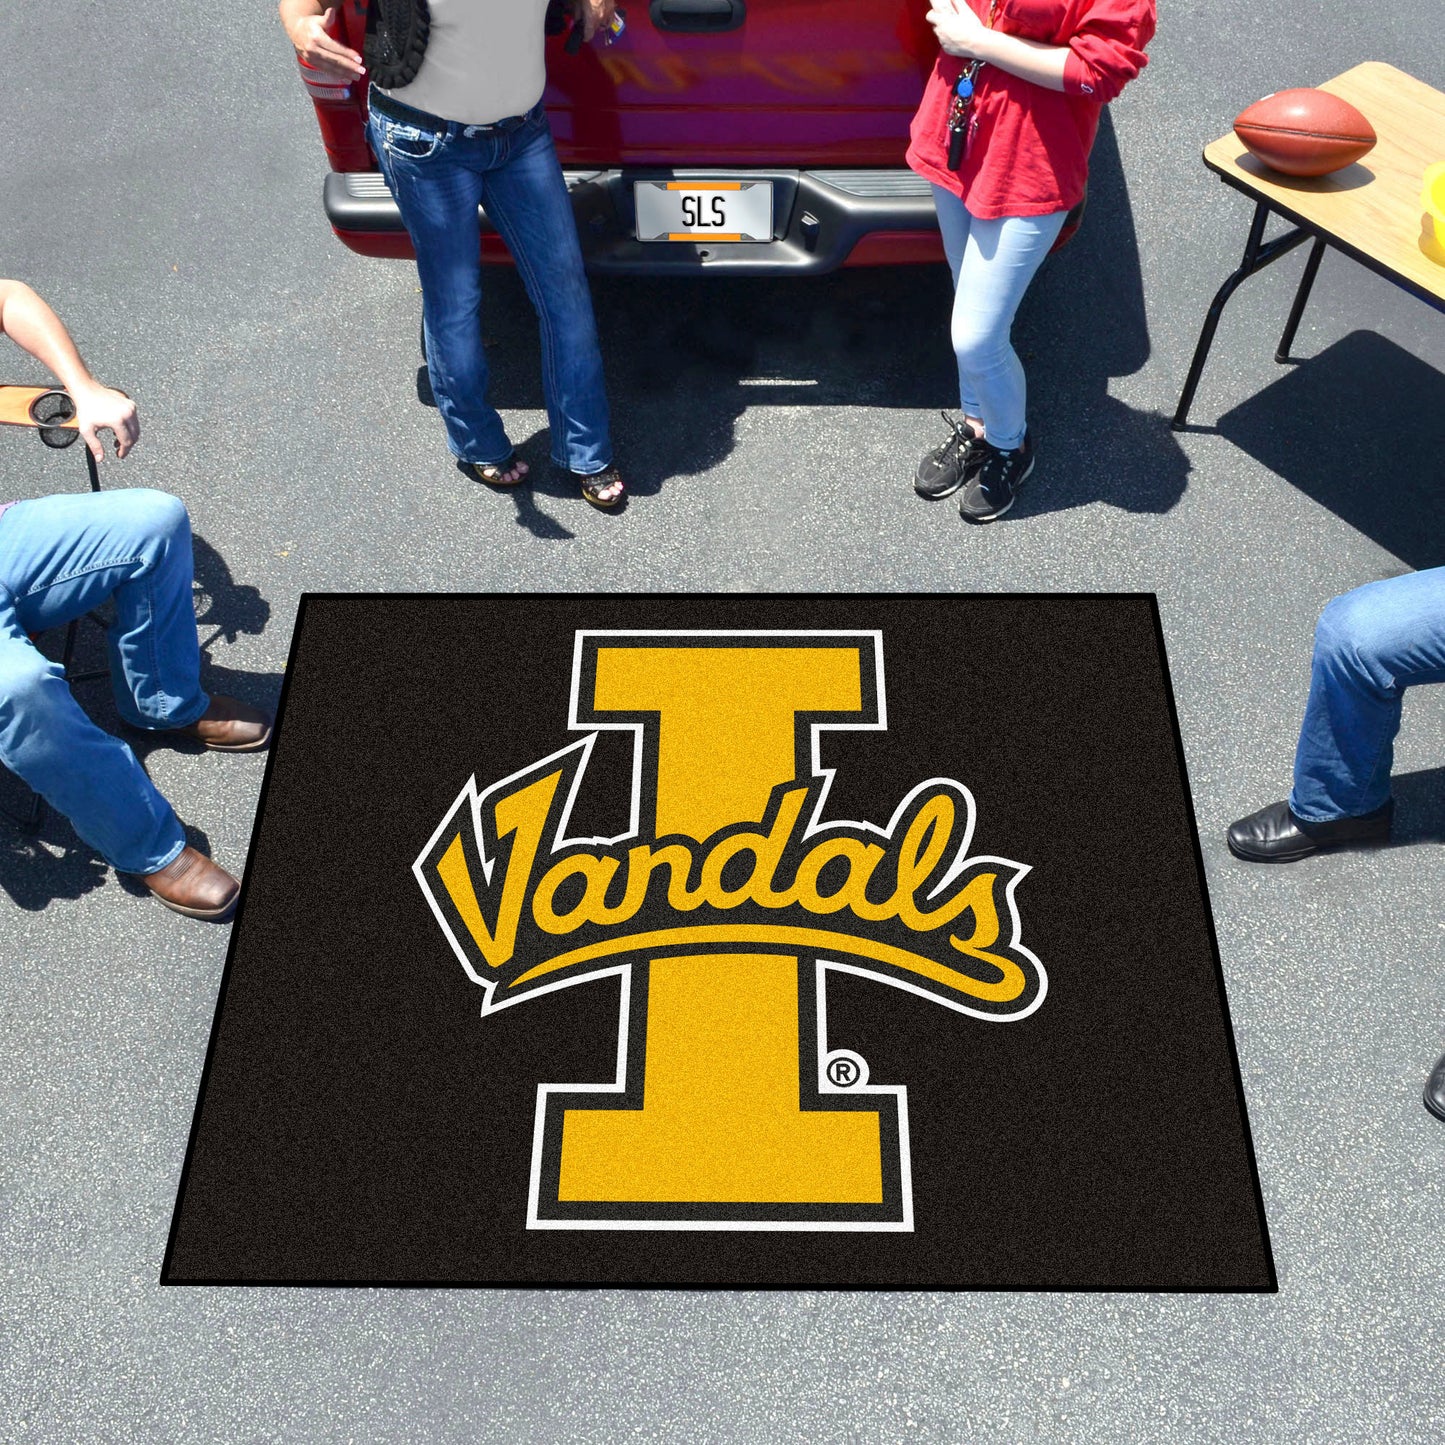 Idaho Vandals Tailgater Rug - 5ft. x 6ft.